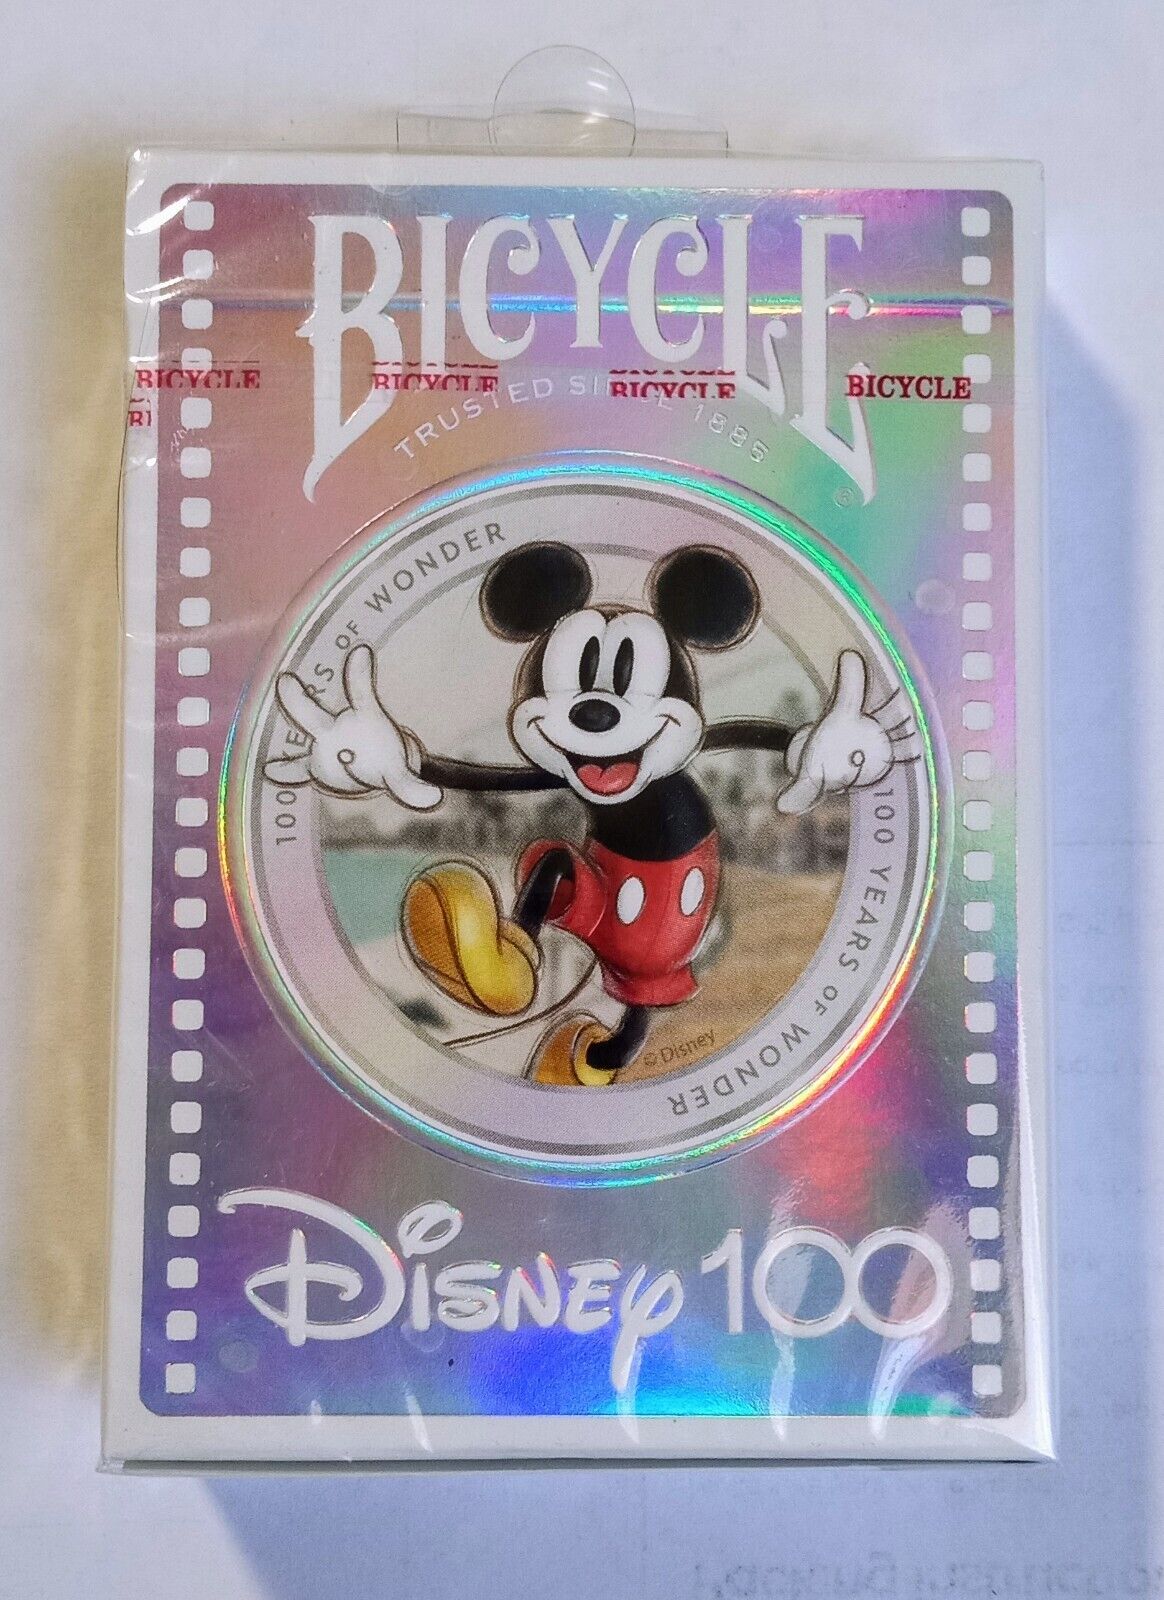 New Sealed Bicycle Playing Cards Disney 100 Years Anniversary Holographic Deck